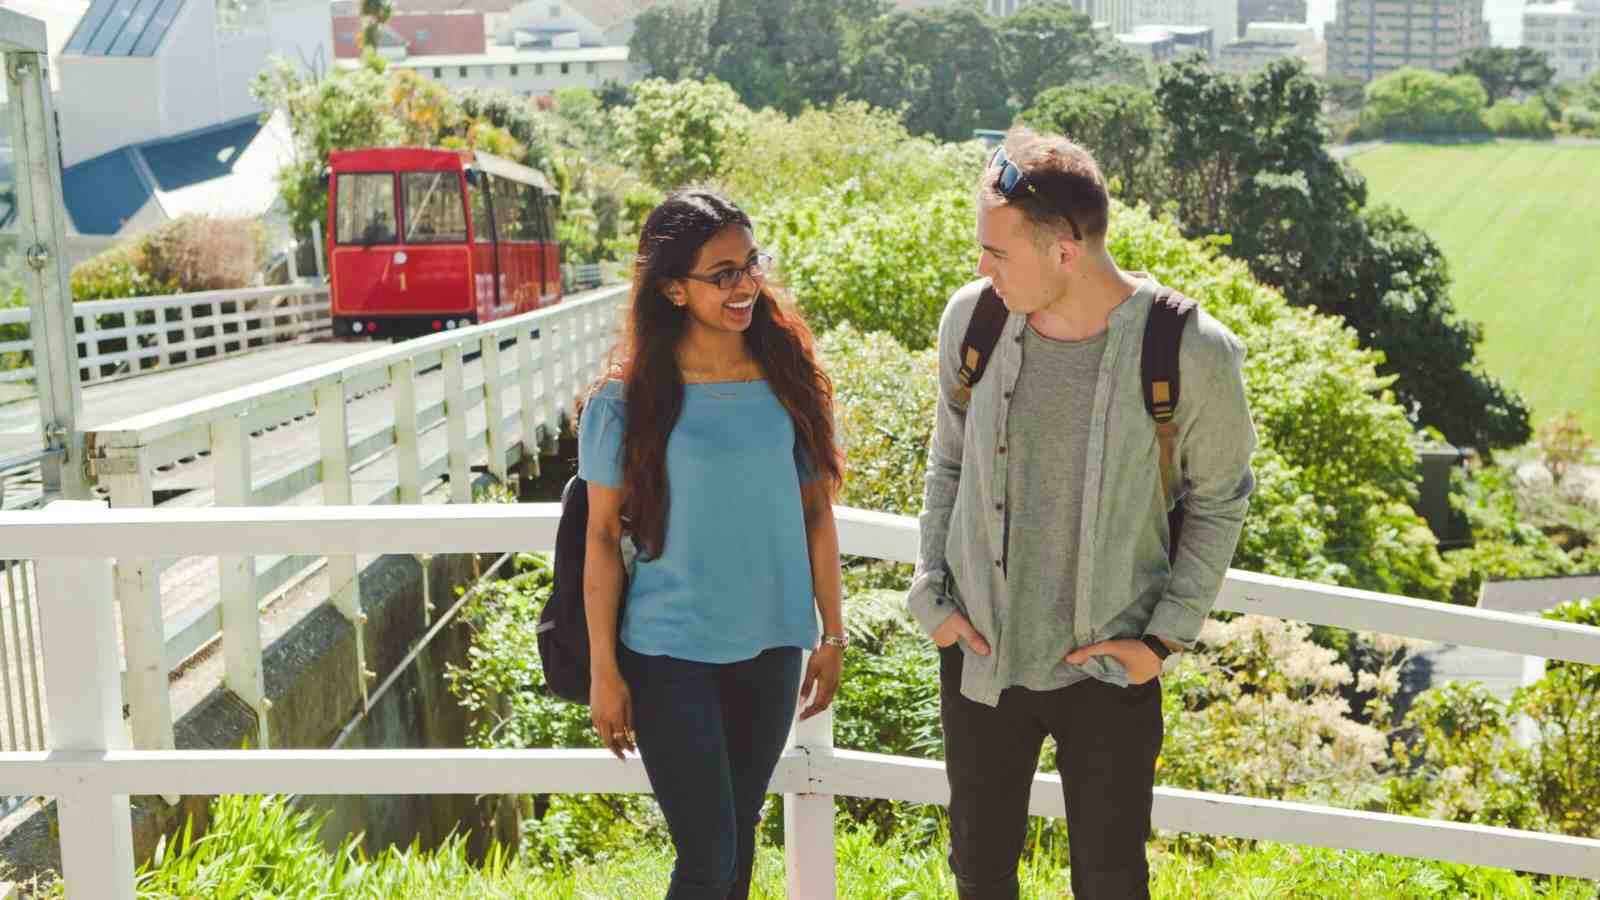 Two university students standing and talking near the cable car in Wellington.